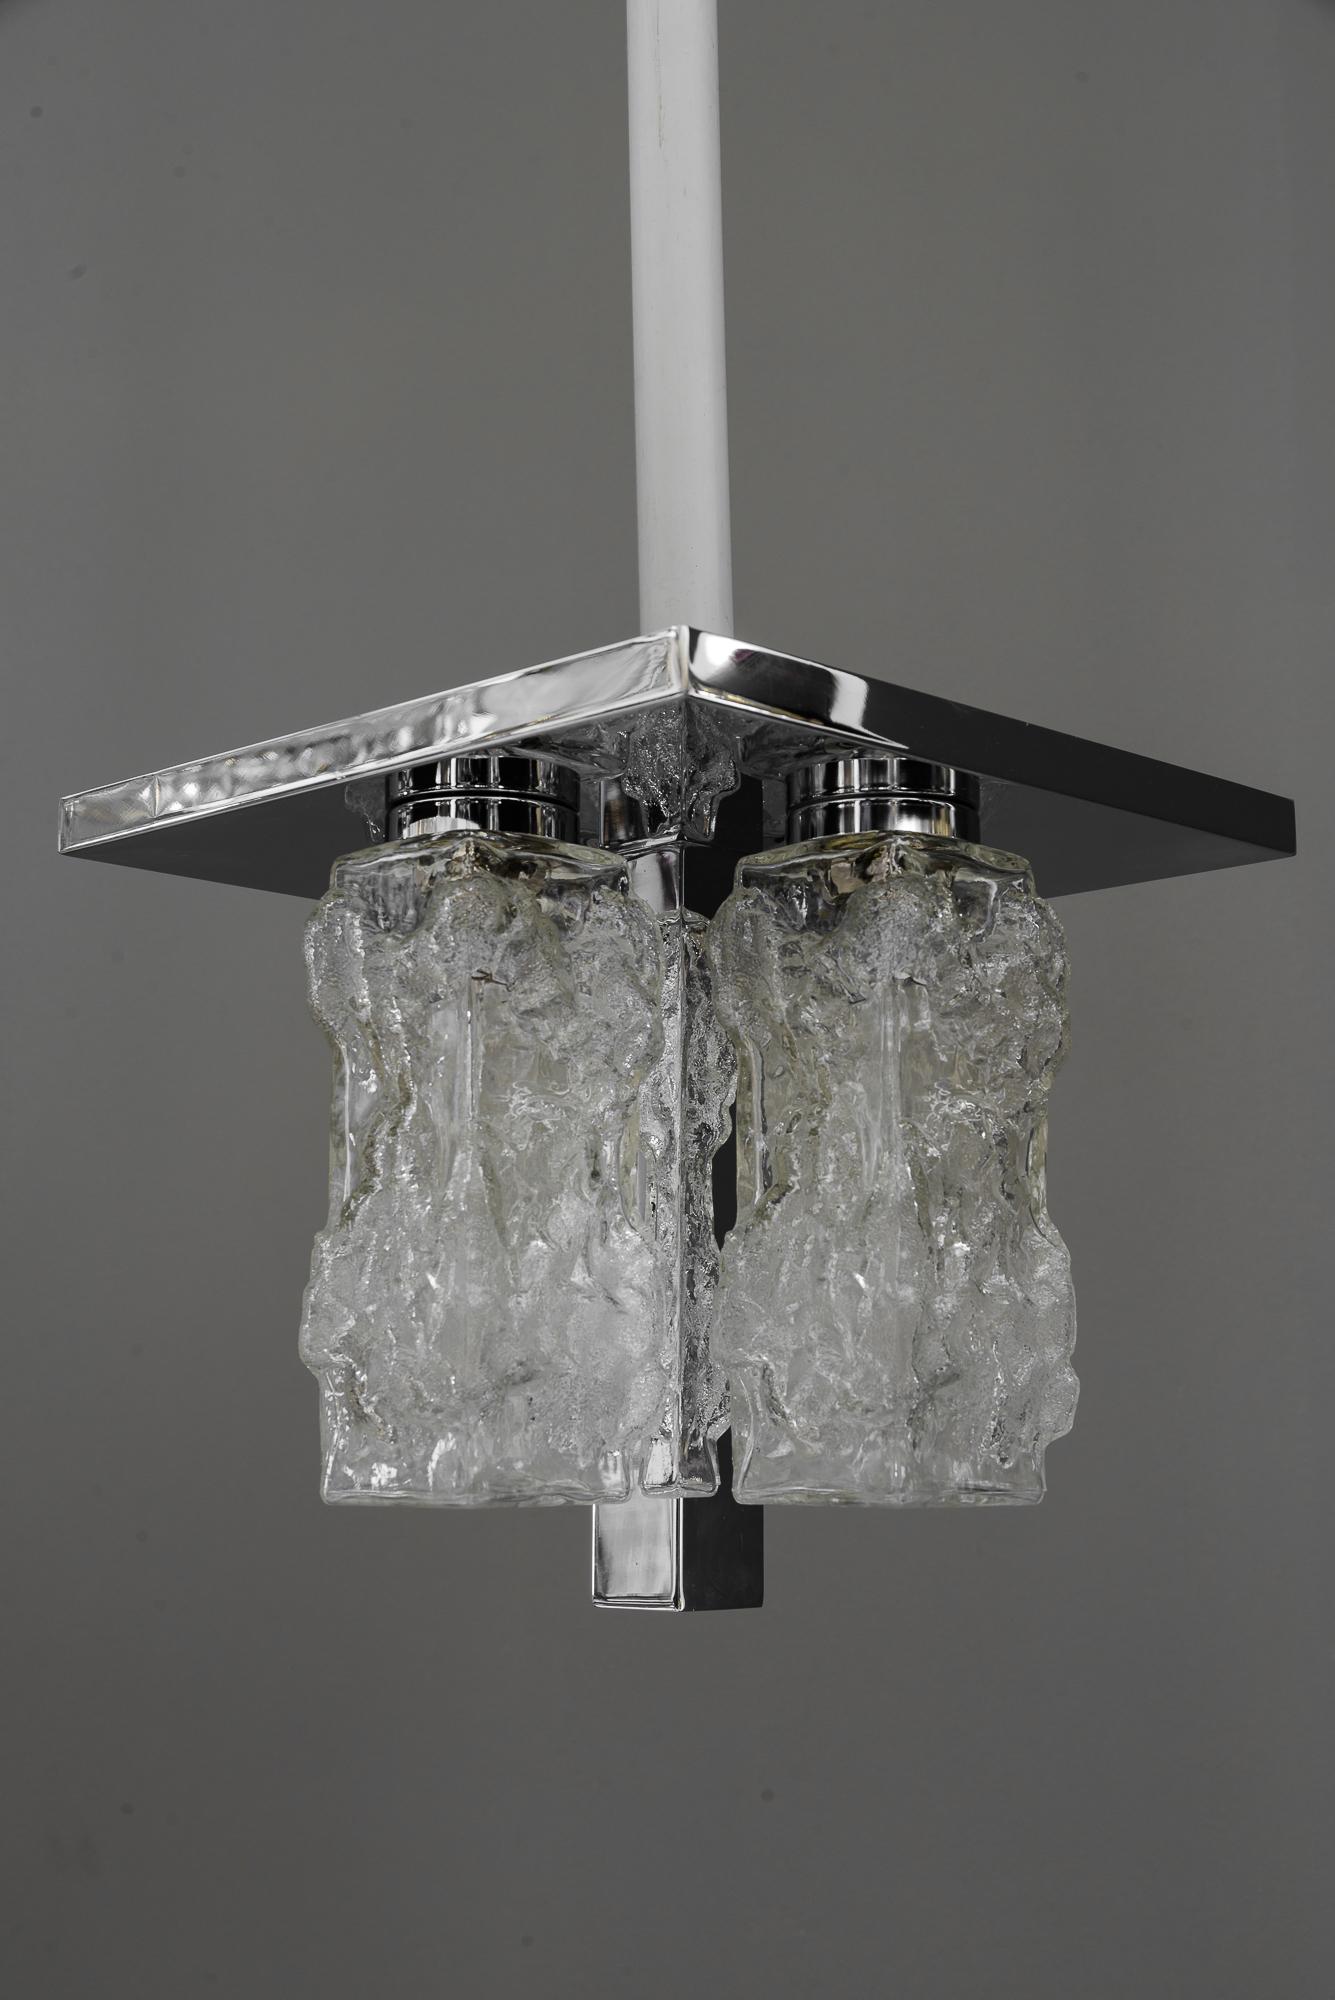 Petite square nickel-plated ice glass flush mount by Hillebrand, Germany, 1970s
Original condition.